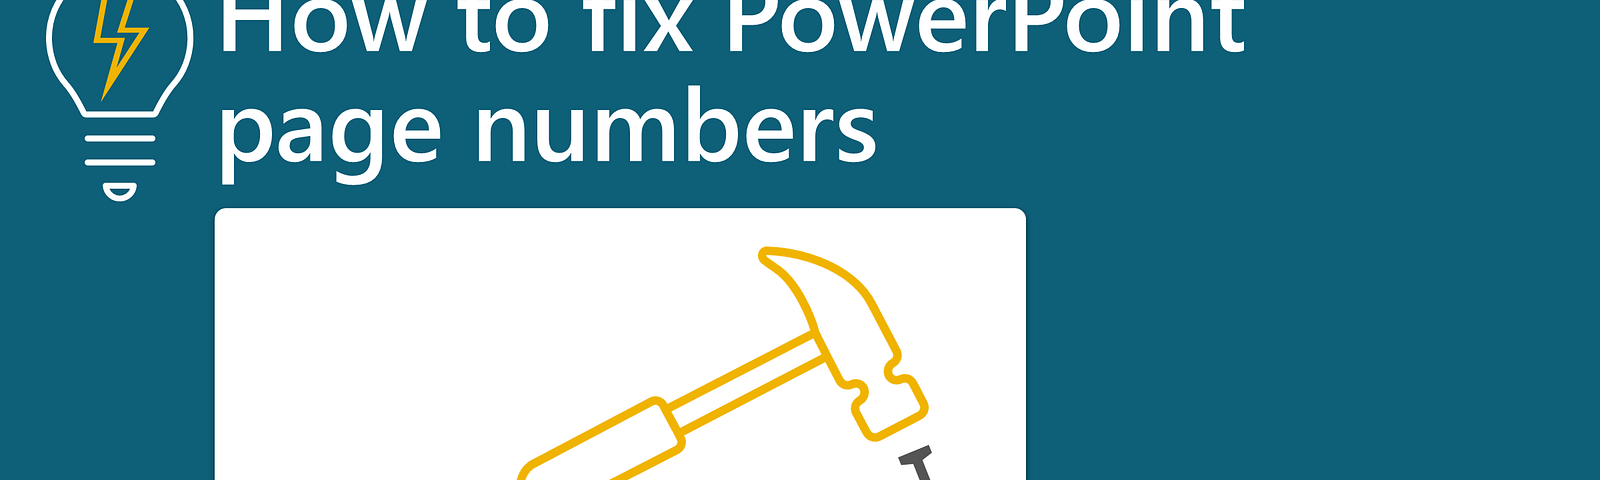 Article title plus image of a hammer nailing the page numbers into place